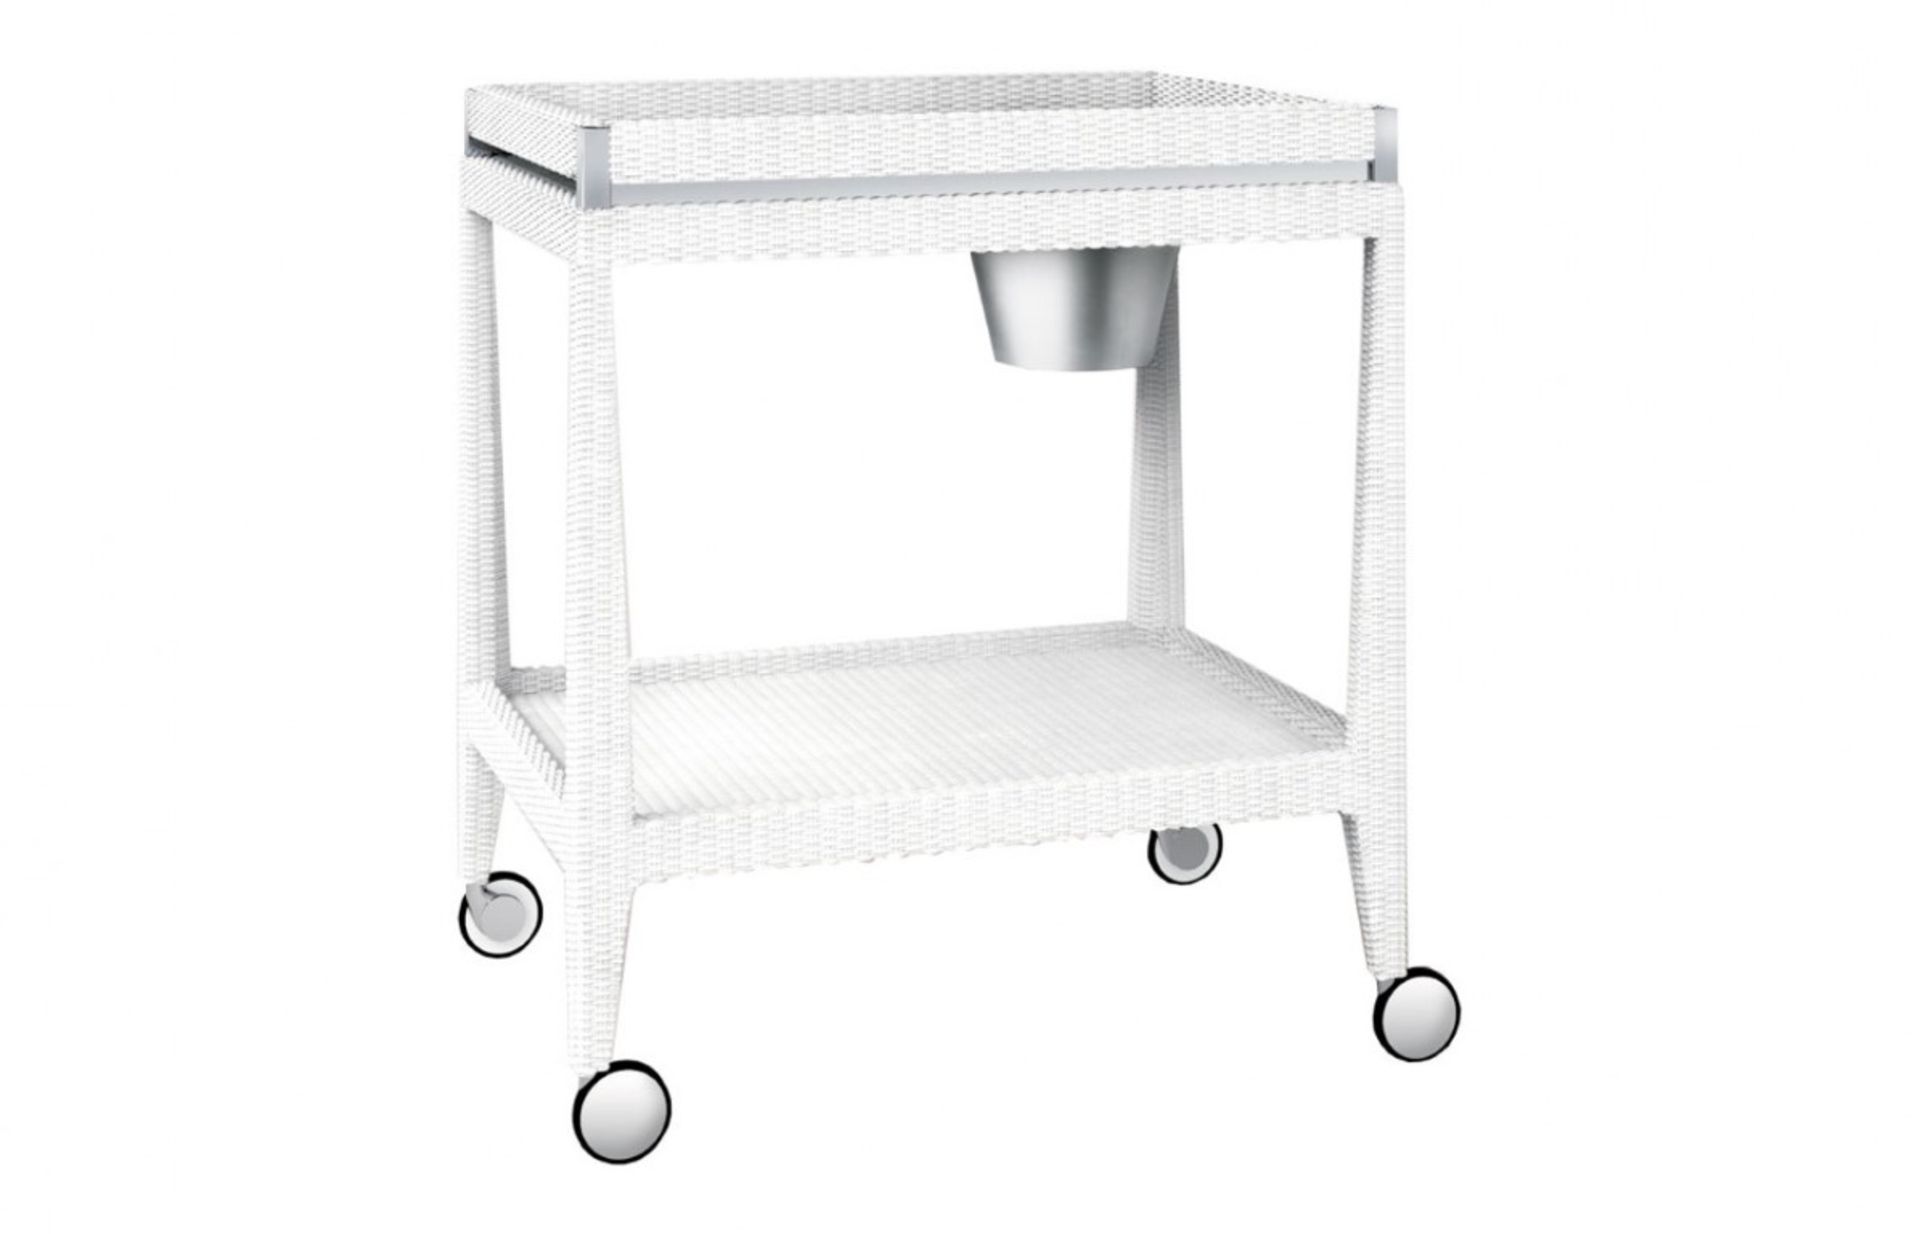 1 x Smania Procida Politech Trolley - Outdoor Furniture, Politech Trolley with Steel Details and - Image 8 of 8